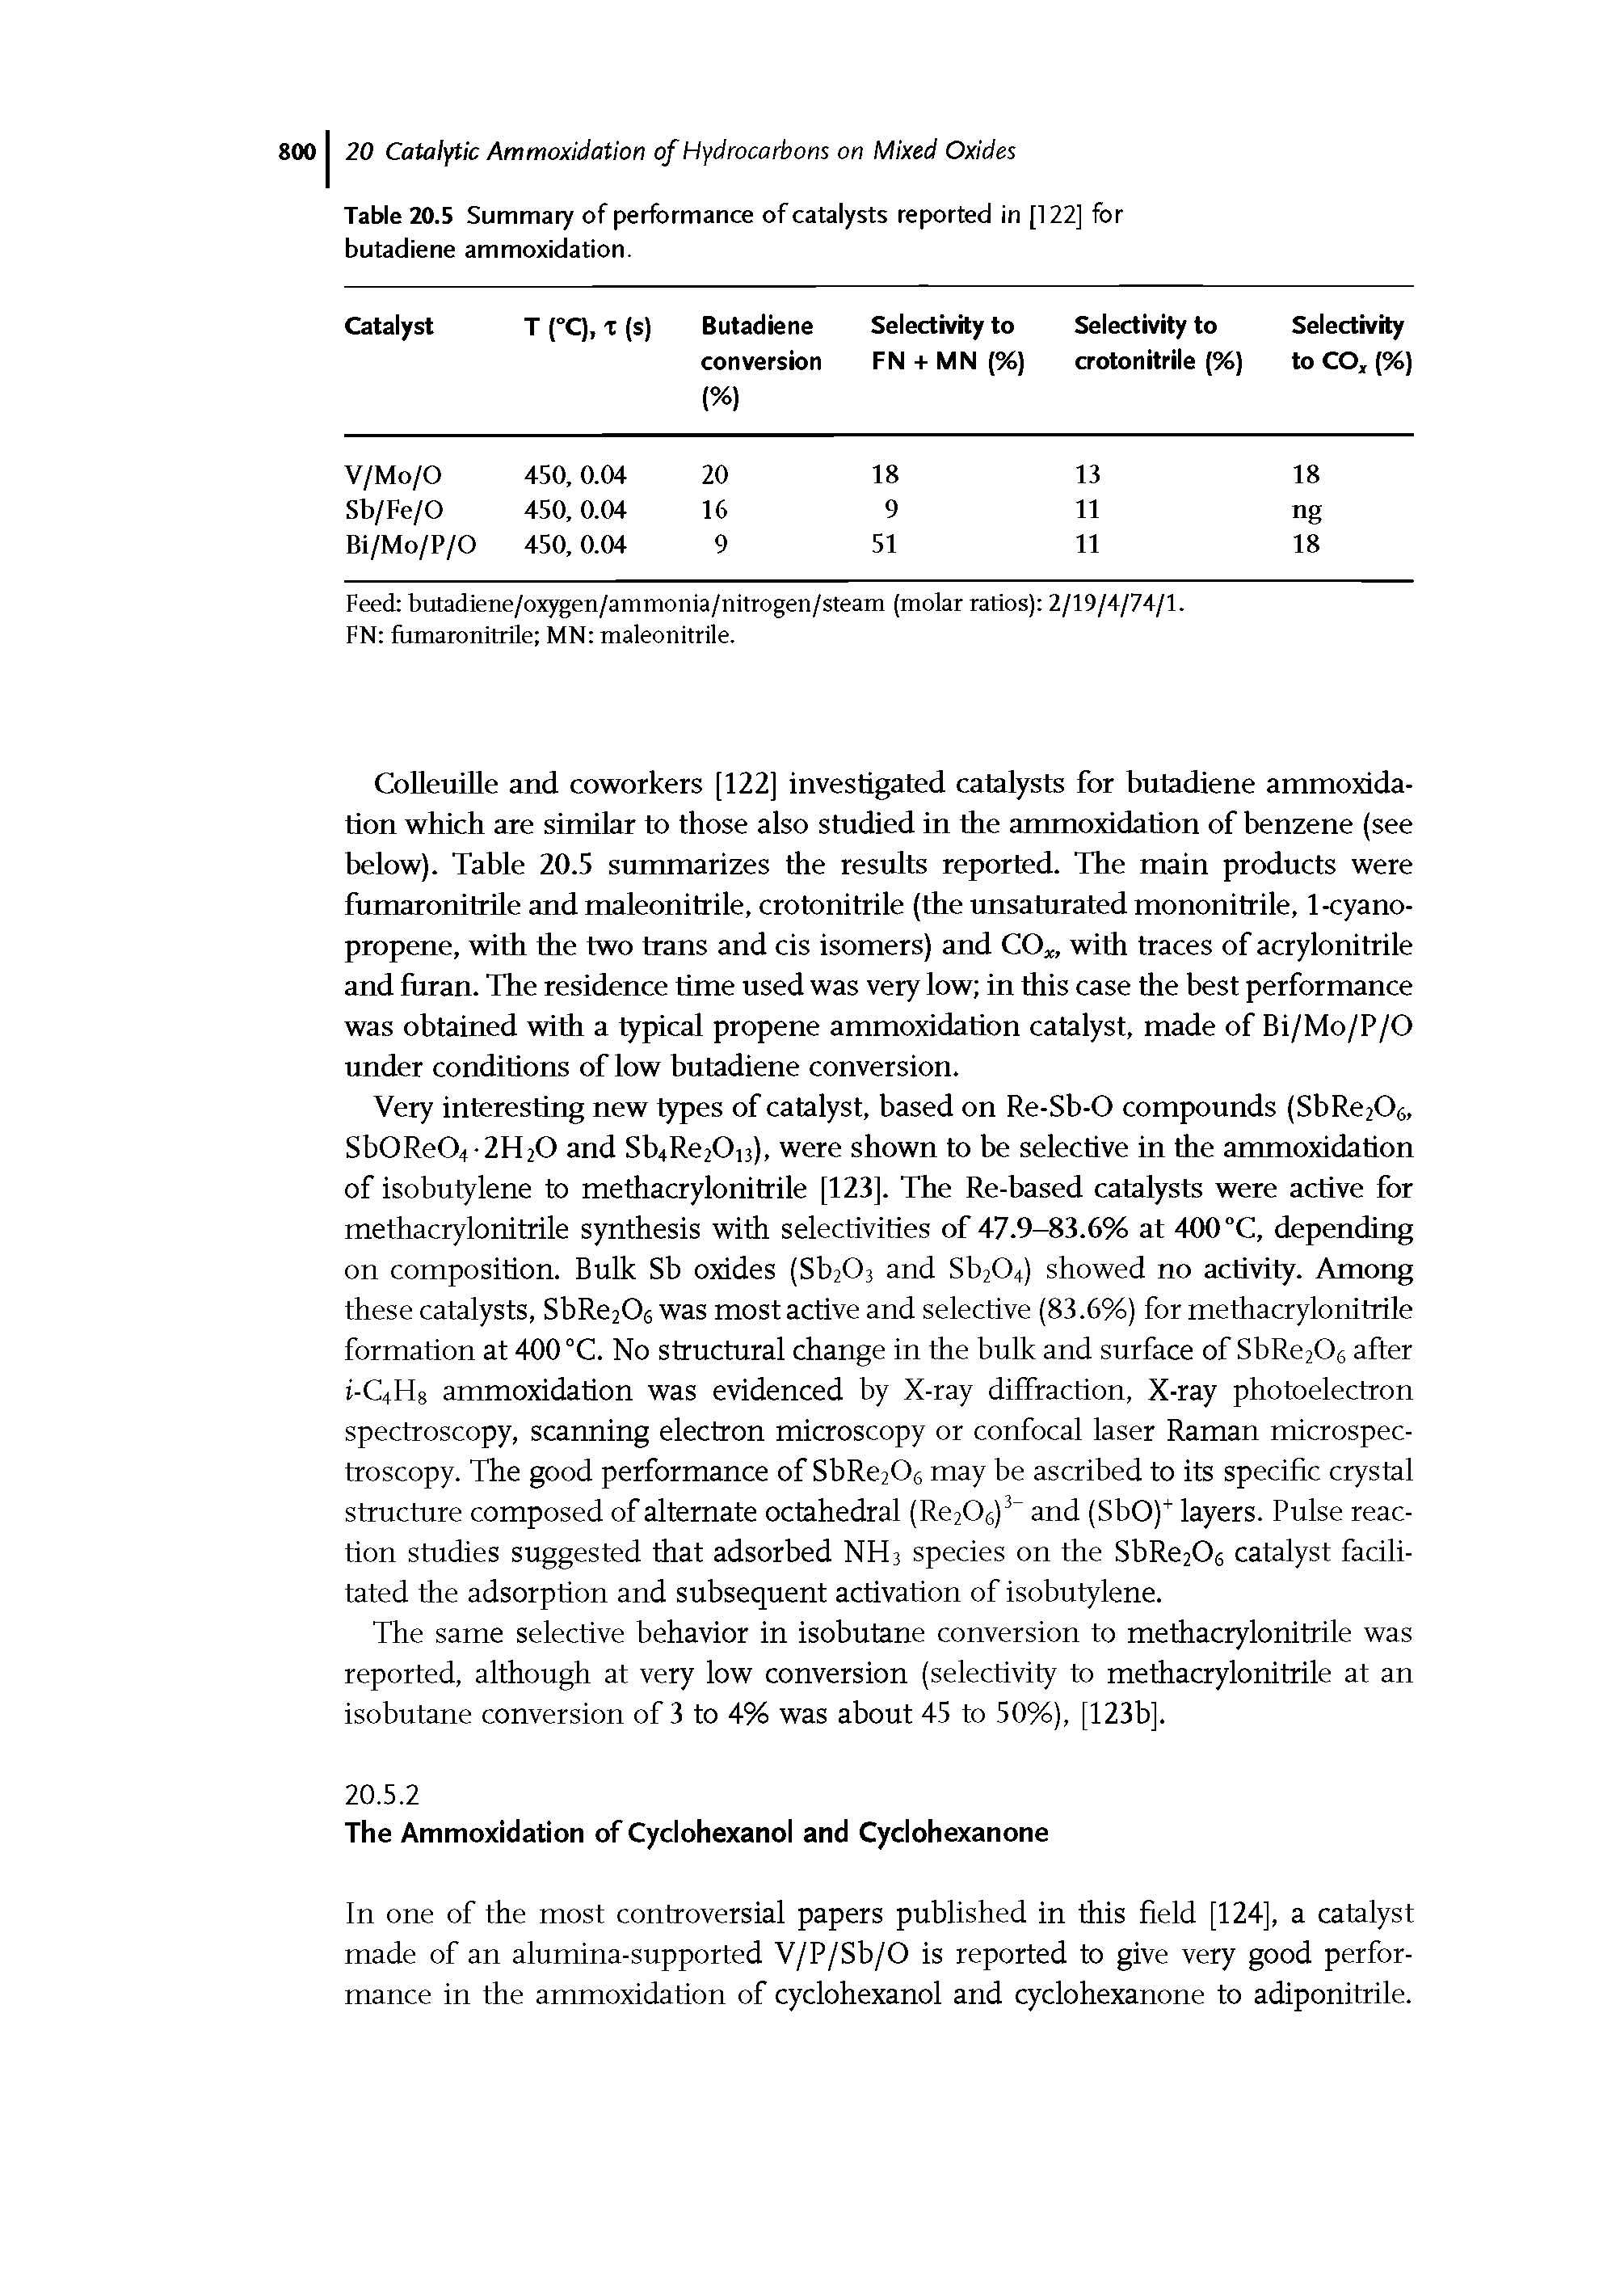 Table 20.5 Summary of performance of catalysts reported in [122] for butadiene ammoxidation.